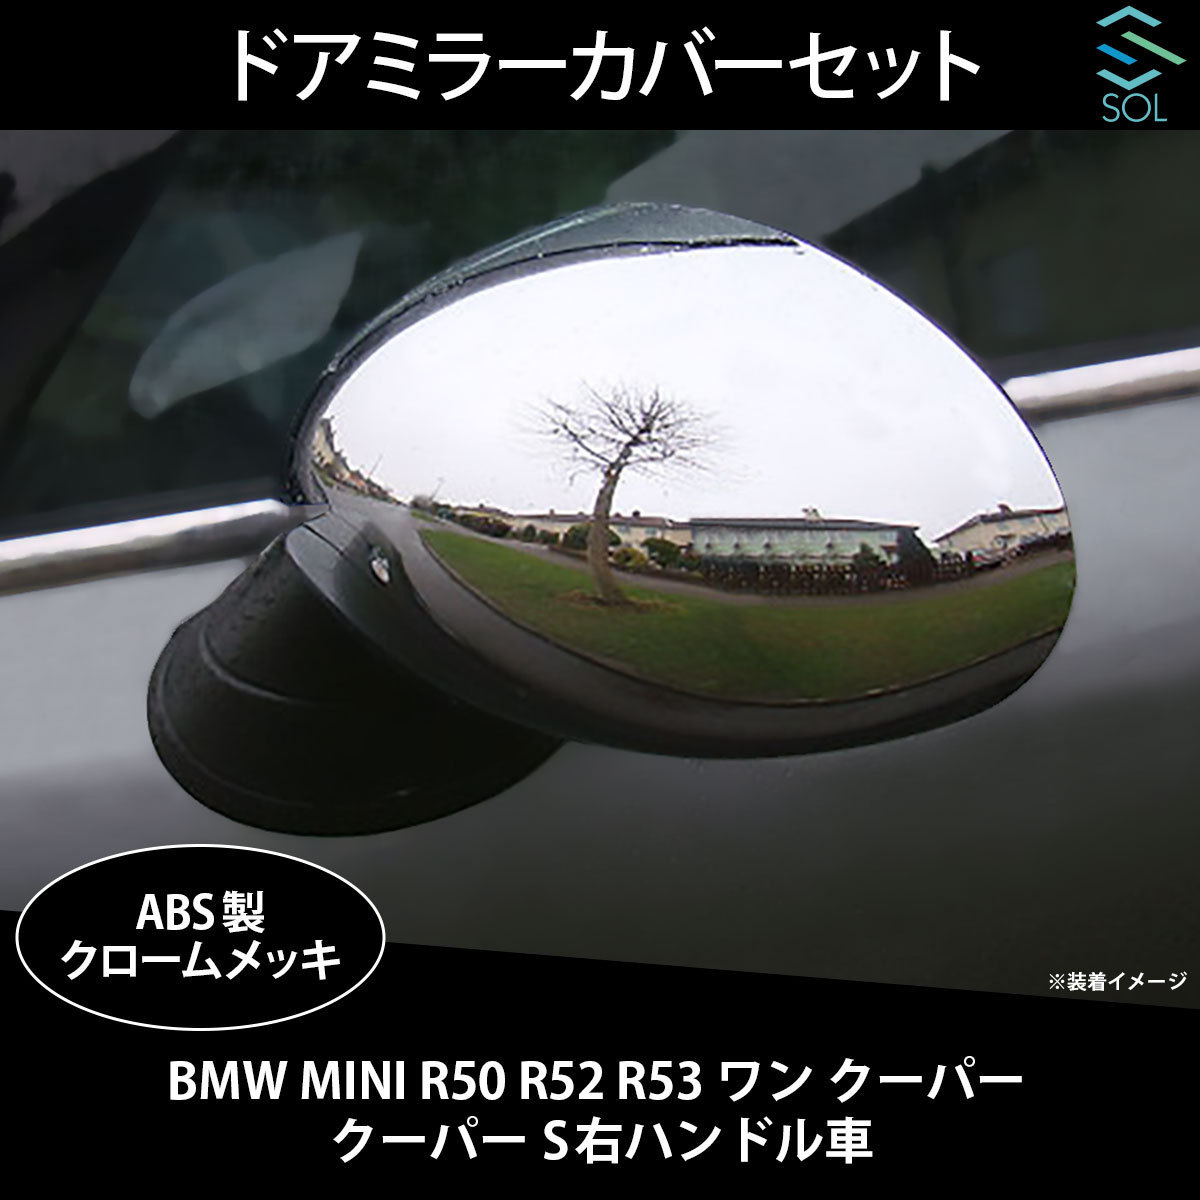 BMW MINI R50 R52 R53 one Cooper Cooper S right steering wheel for door mirror cover set chrome plating shipping deadline 18 hour 